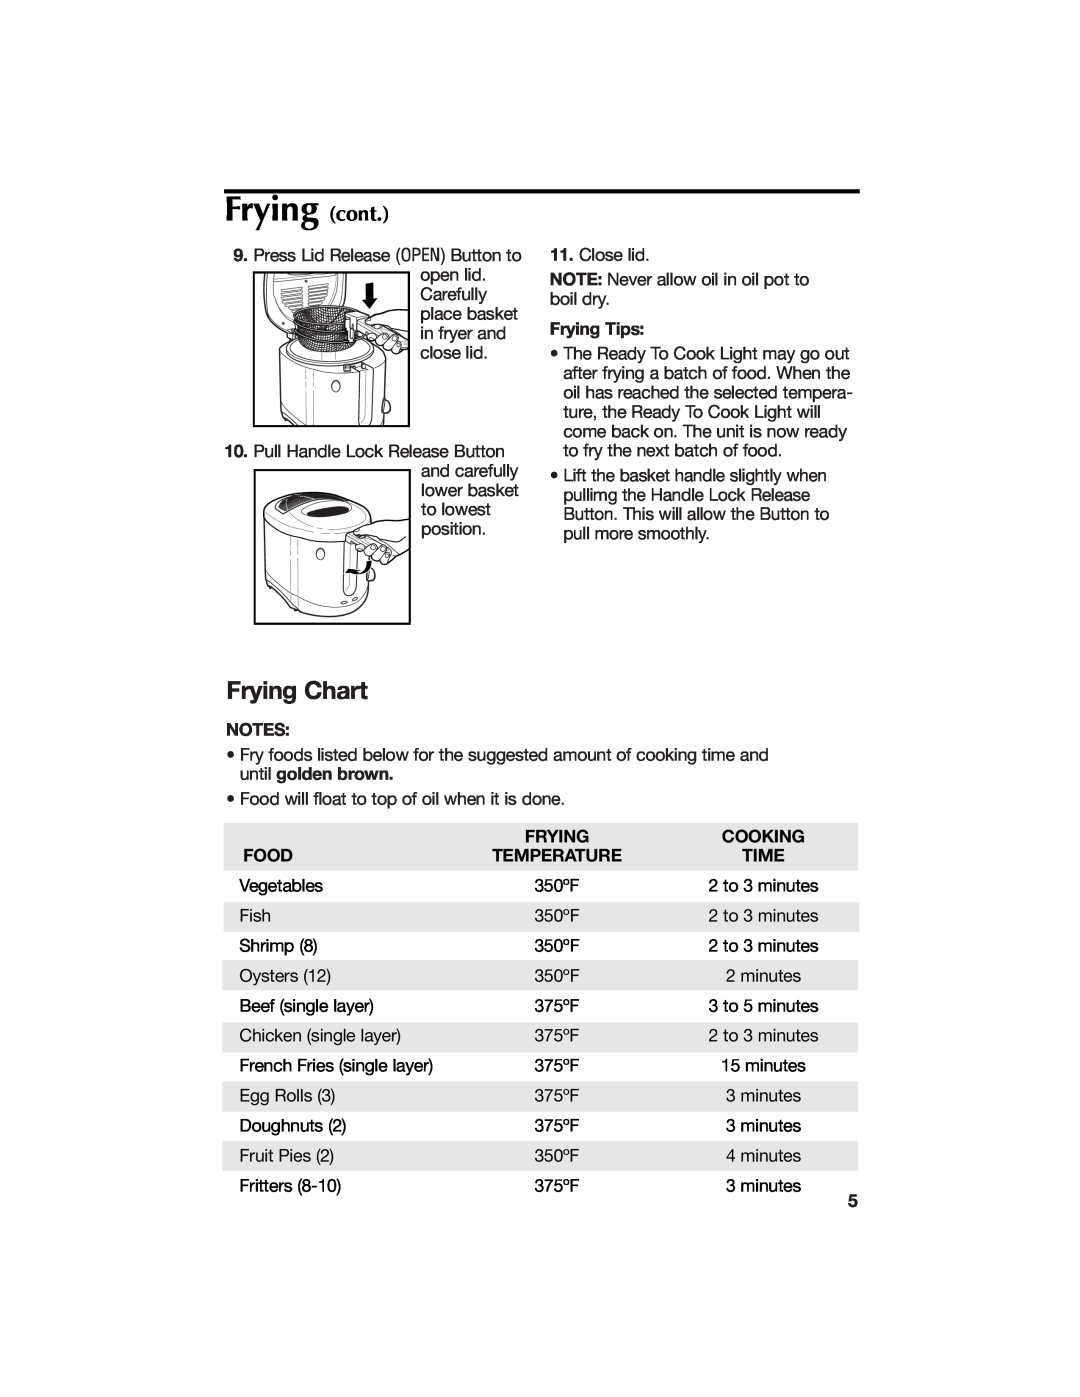 Hamilton Beach 840113900 manual Frying cont, Frying Tips, Cooking, Food, Temperature, Time, Frying Chart 